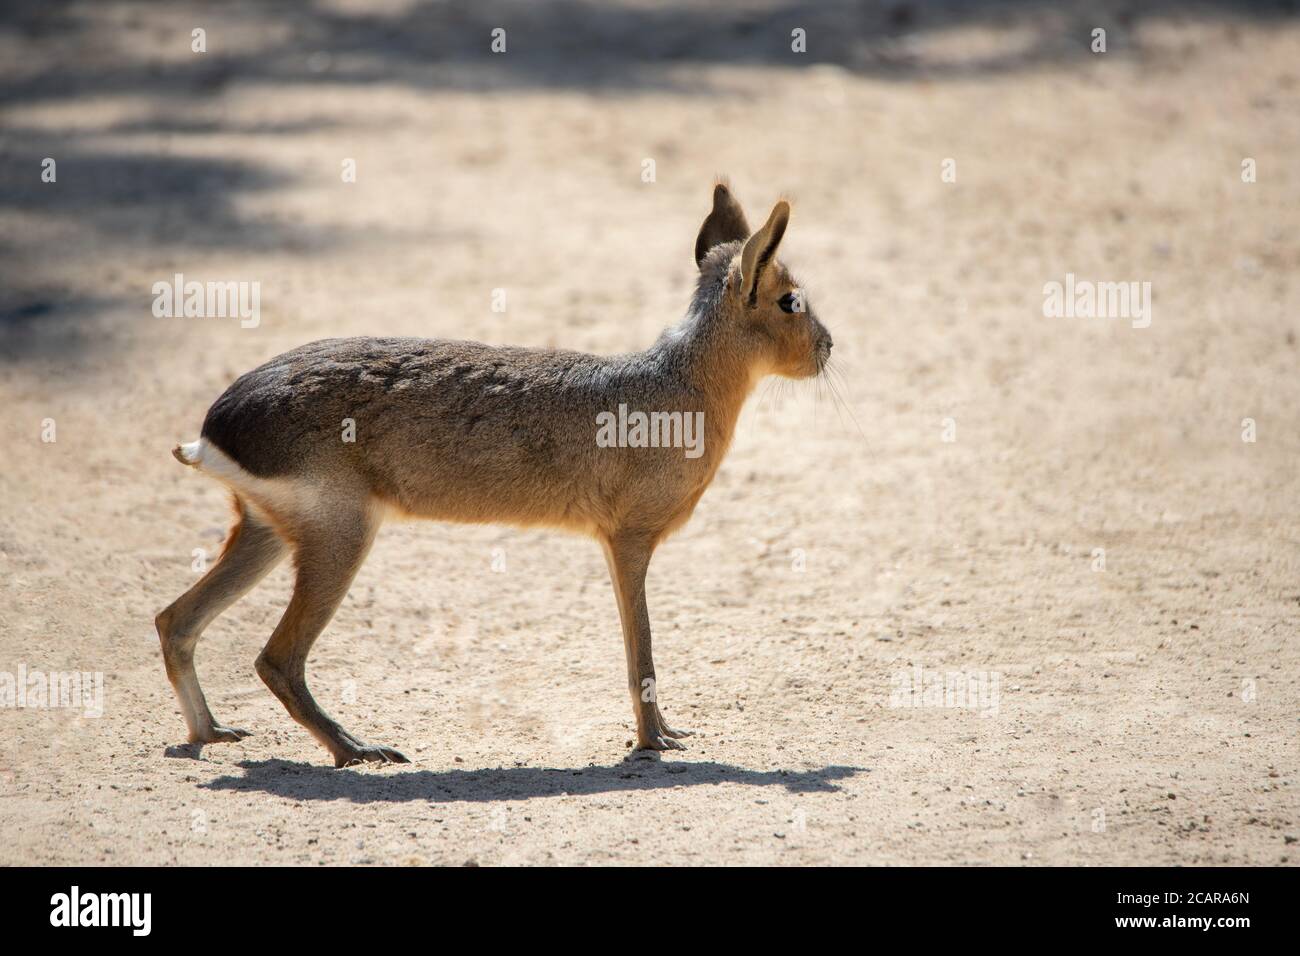 Adult patagonian hare also known as mara, on alert into the wild Stock Photo